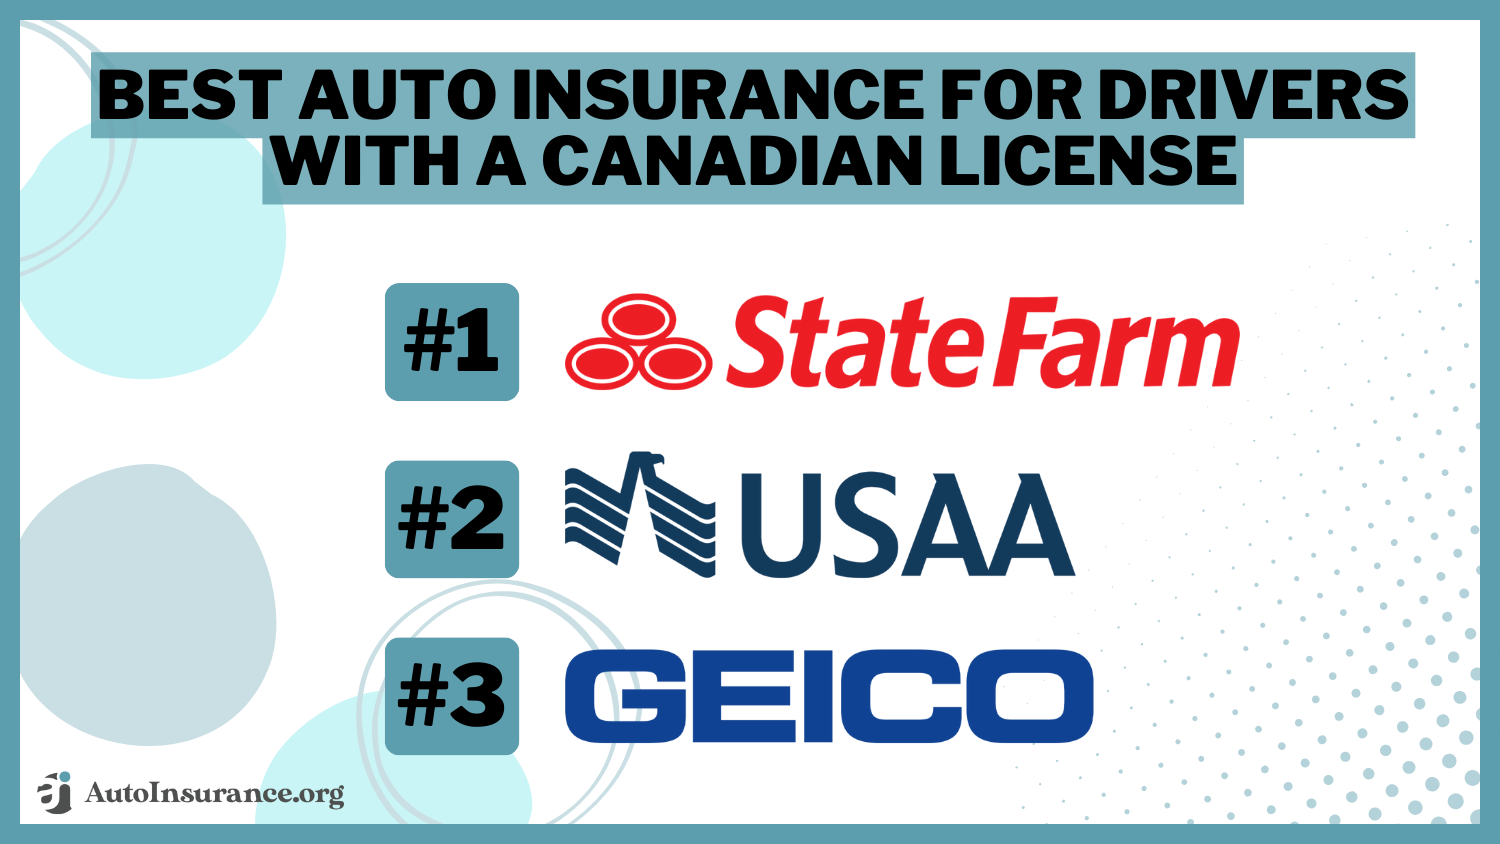 Best Auto Insurance for Drivers with a Canadian License: State Farm, USAA, and Geico